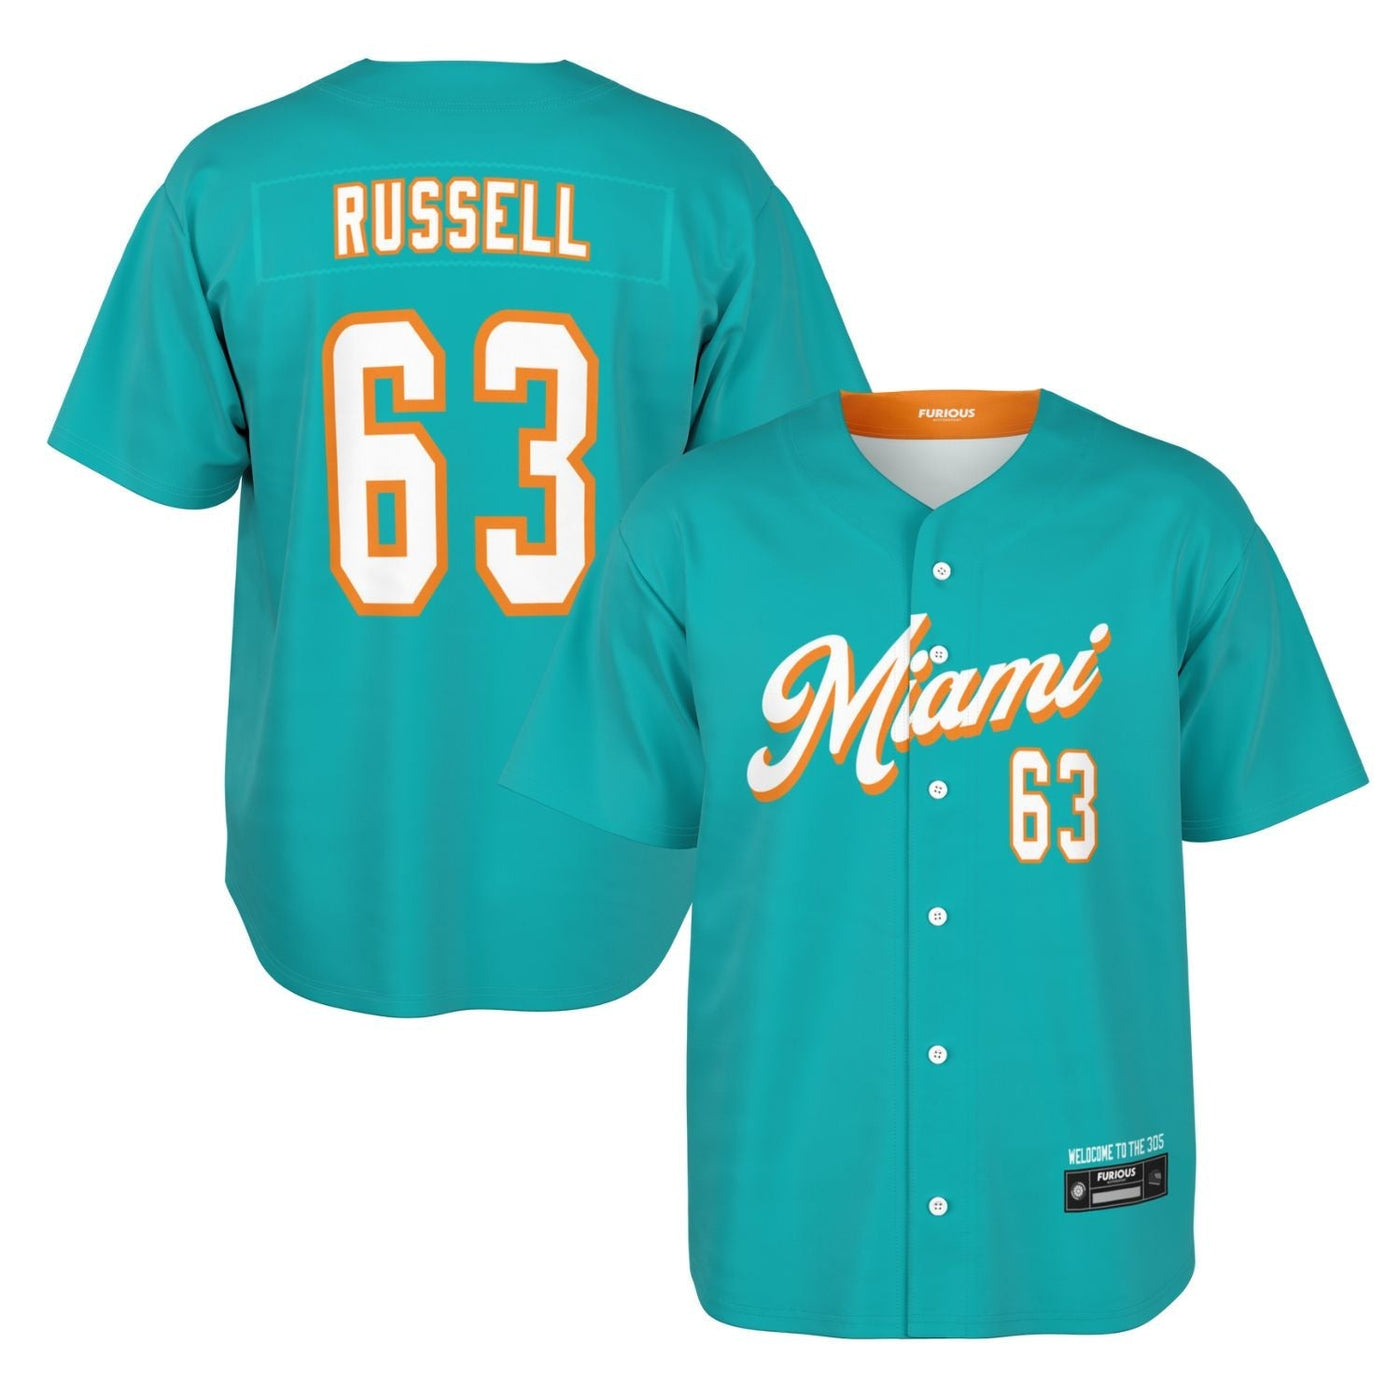 Russell - (305) Jersey (Clearance) - Furious Motorsport